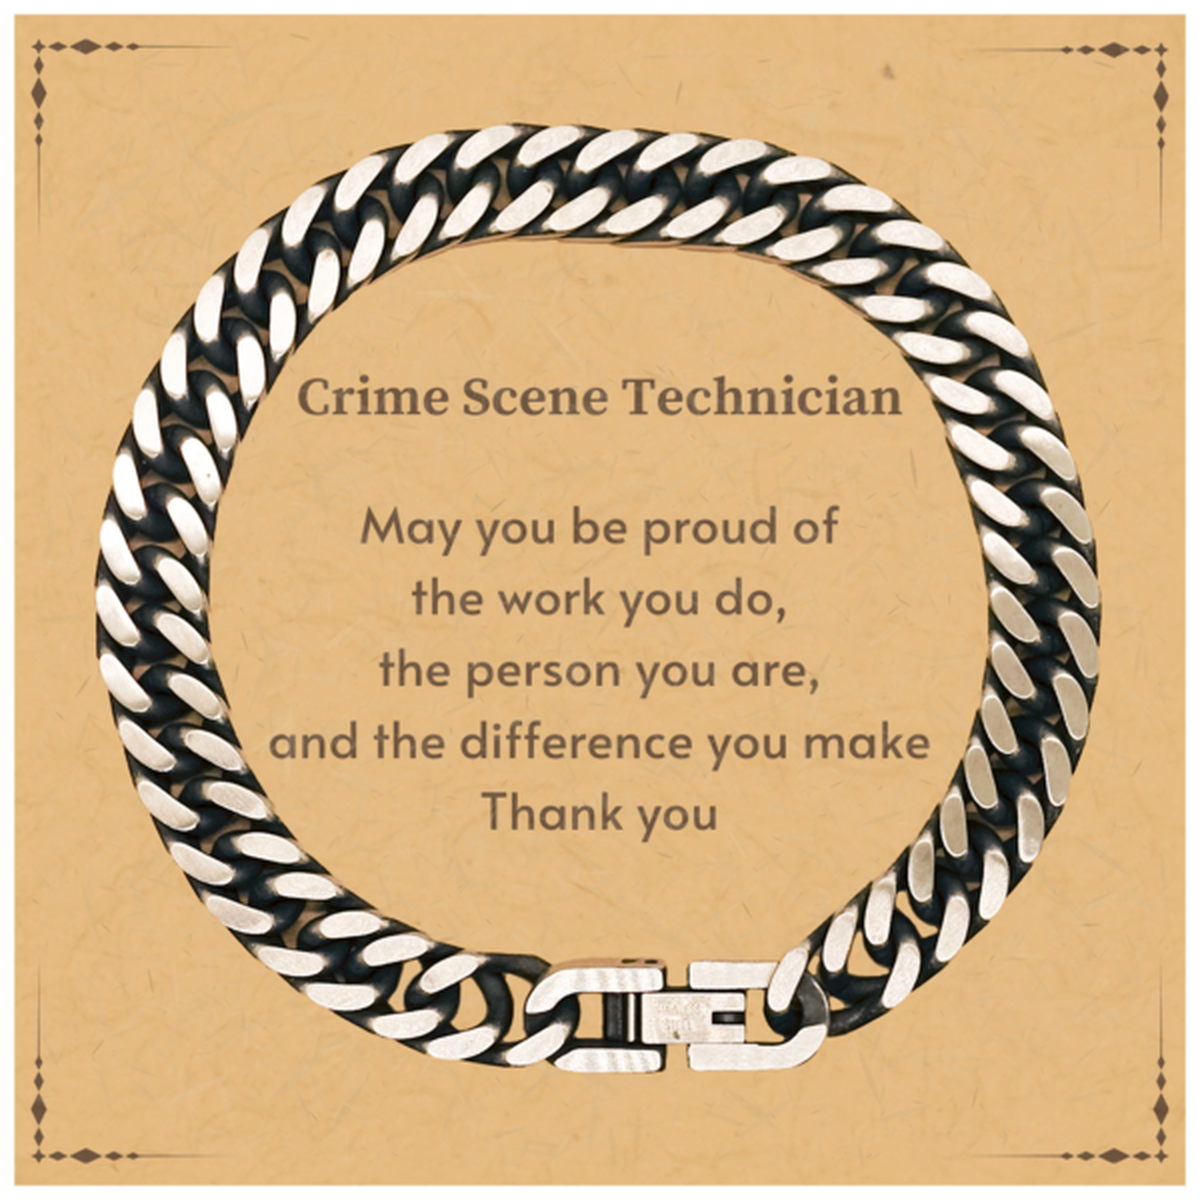 Heartwarming Cuban Link Chain Bracelet Retirement Coworkers Gifts for Crime Scene Technician, Crime Scene Technician May You be proud of the work you do, the person you are Gifts for Boss Men Women Friends